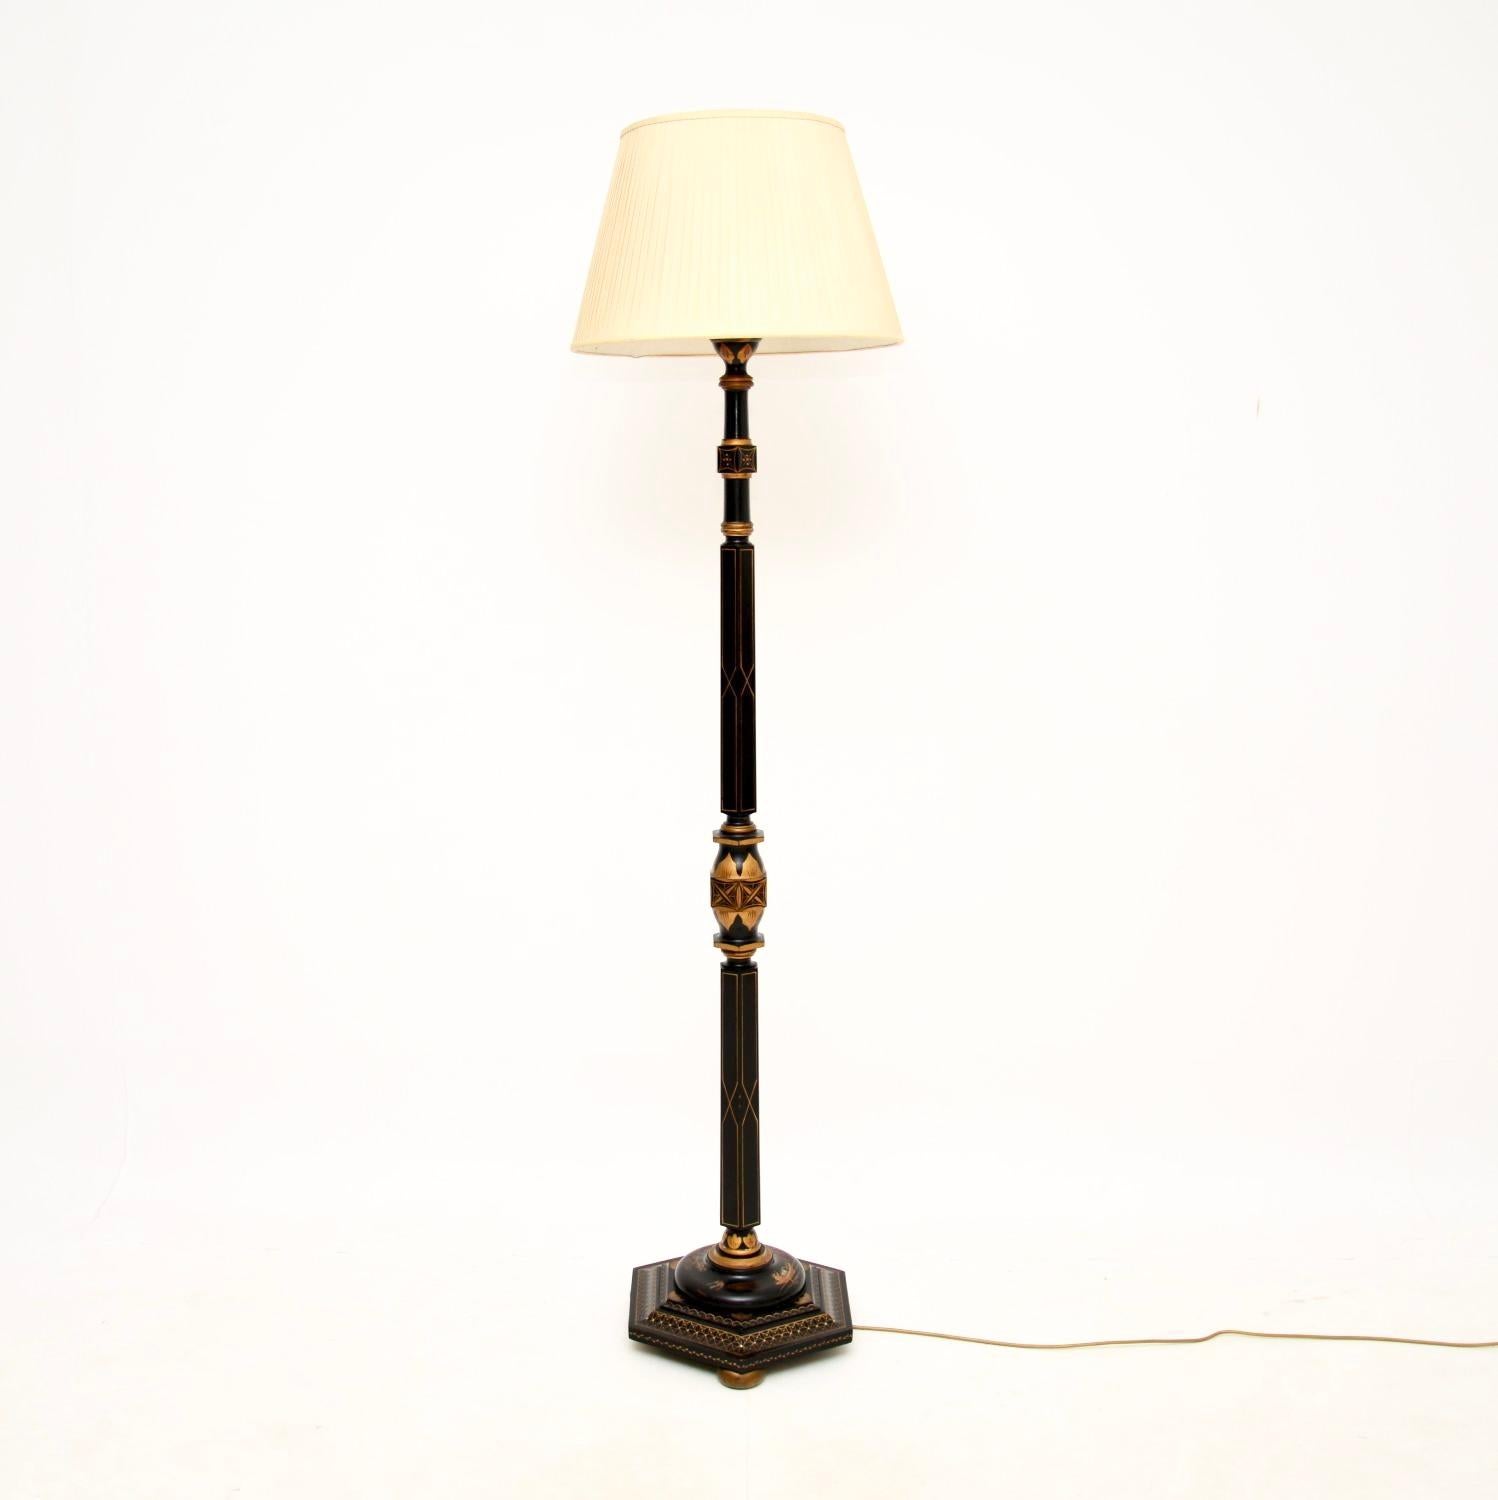 A stunning antique lacquered chinoiserie floor lamp, made in England and dating from the 1920’s.

This is of outstanding quality with wonderful painted and lacquered decorations in the oriental style. The solid wood frame is beautifully crafted,